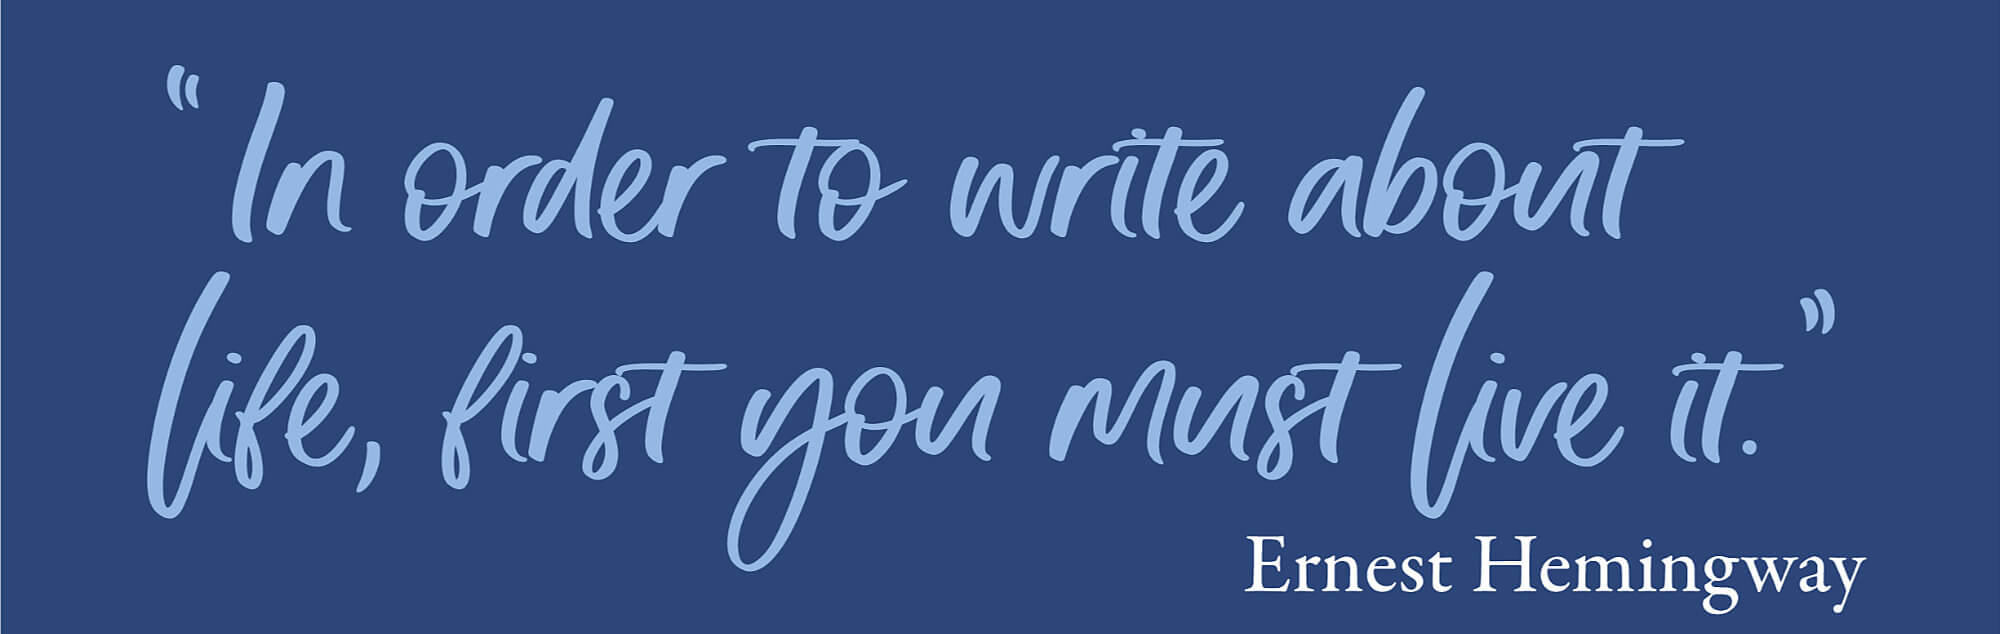 "In order to write about life, first you must live it." - Ernest Hemingway